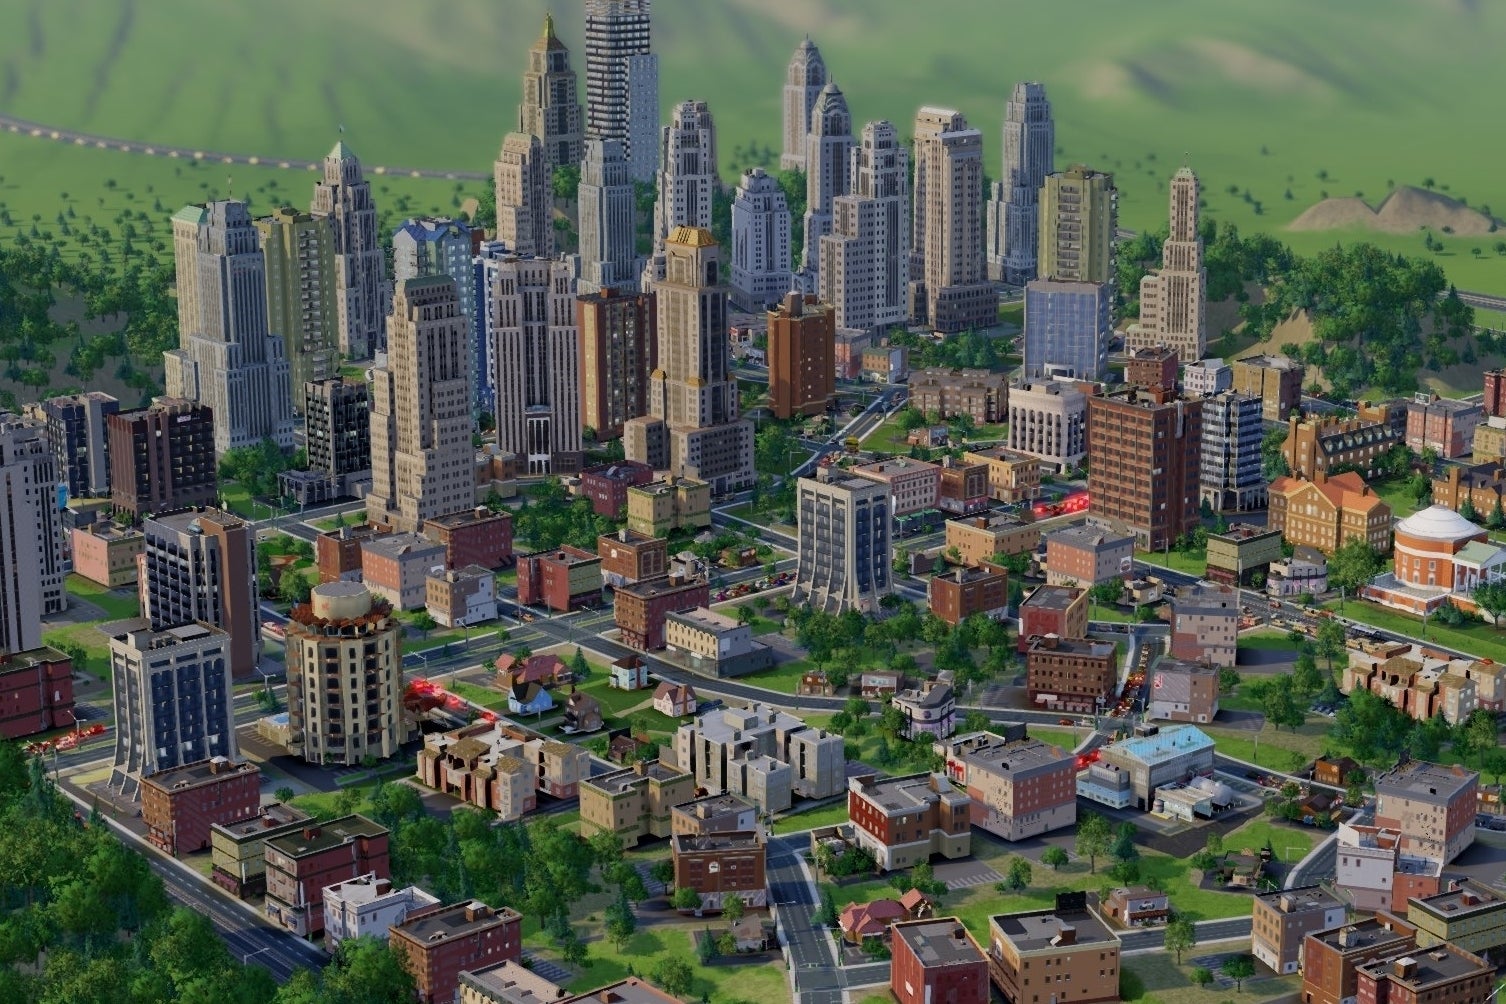 Image for SimCity servers appear to be coping as game hits UK